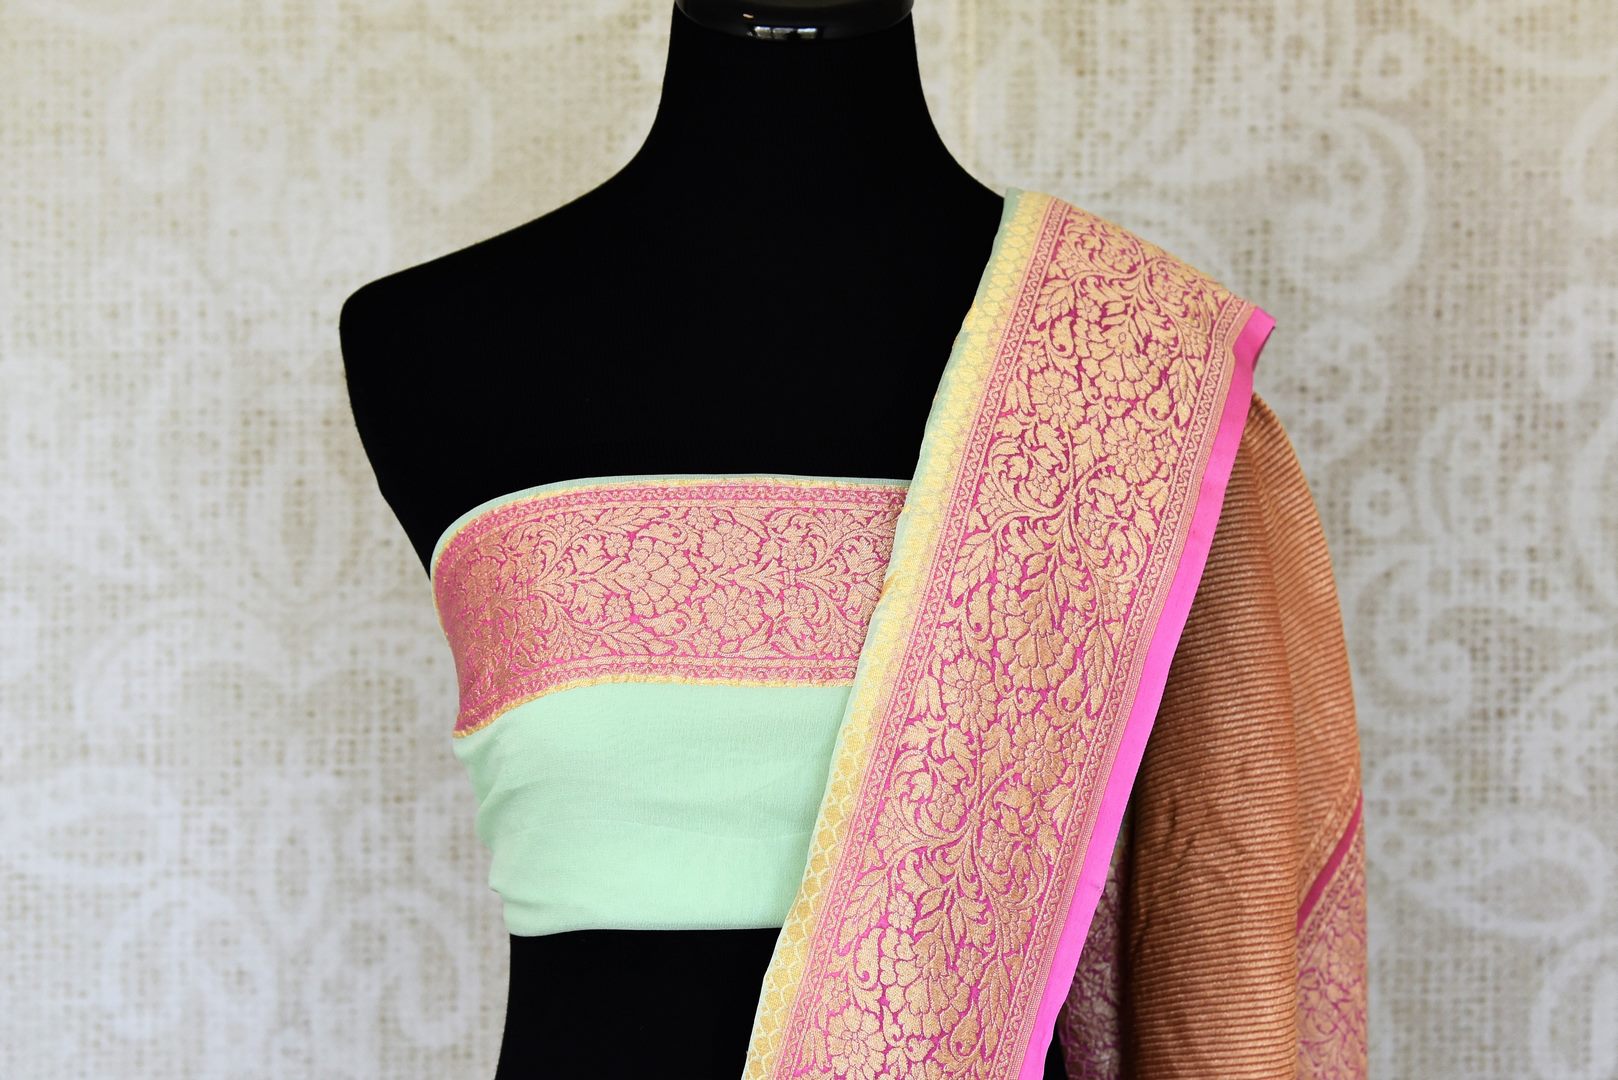 Shop pista green georgette Banarasi saree online in USA with pink zari border. Feel traditional on special occasions in beautiful Indian designer saris from Pure Elegance Indian fashion store in USA. Choose from a splendid variety of Banarasi sarees, pure handwoven saris. Buy online.-blouse pallu